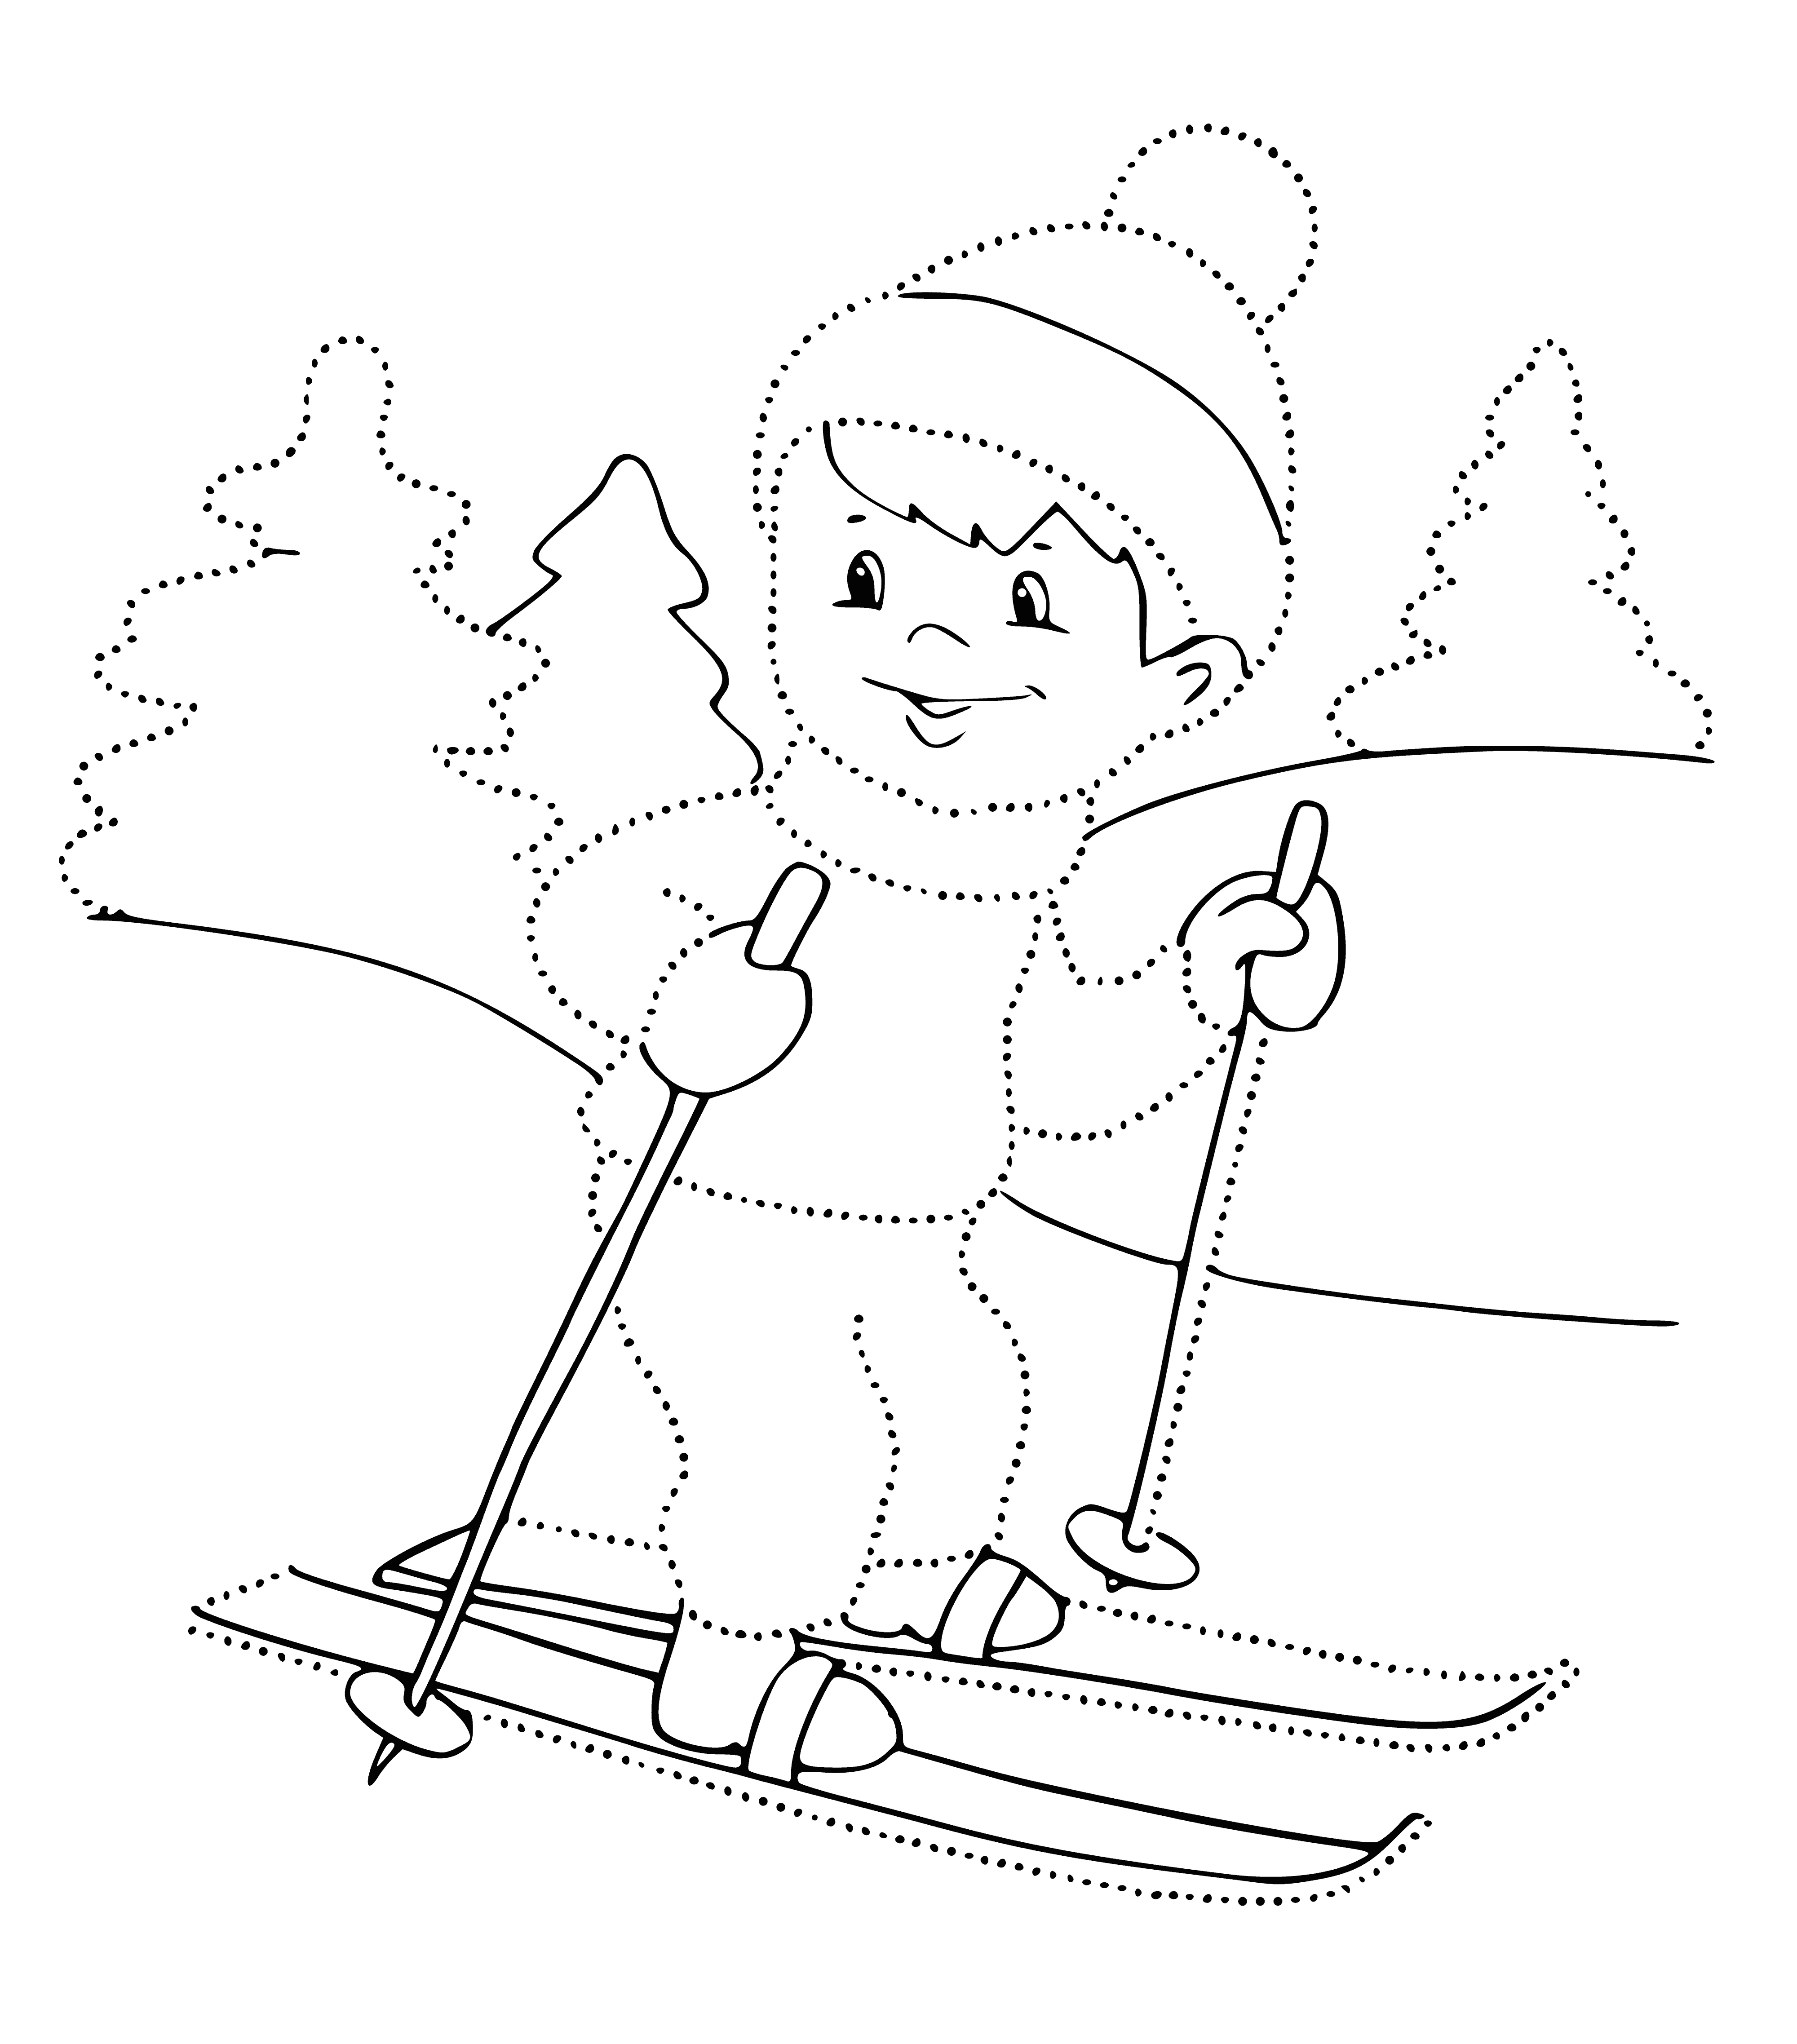 Boy skiing in the forest coloring page